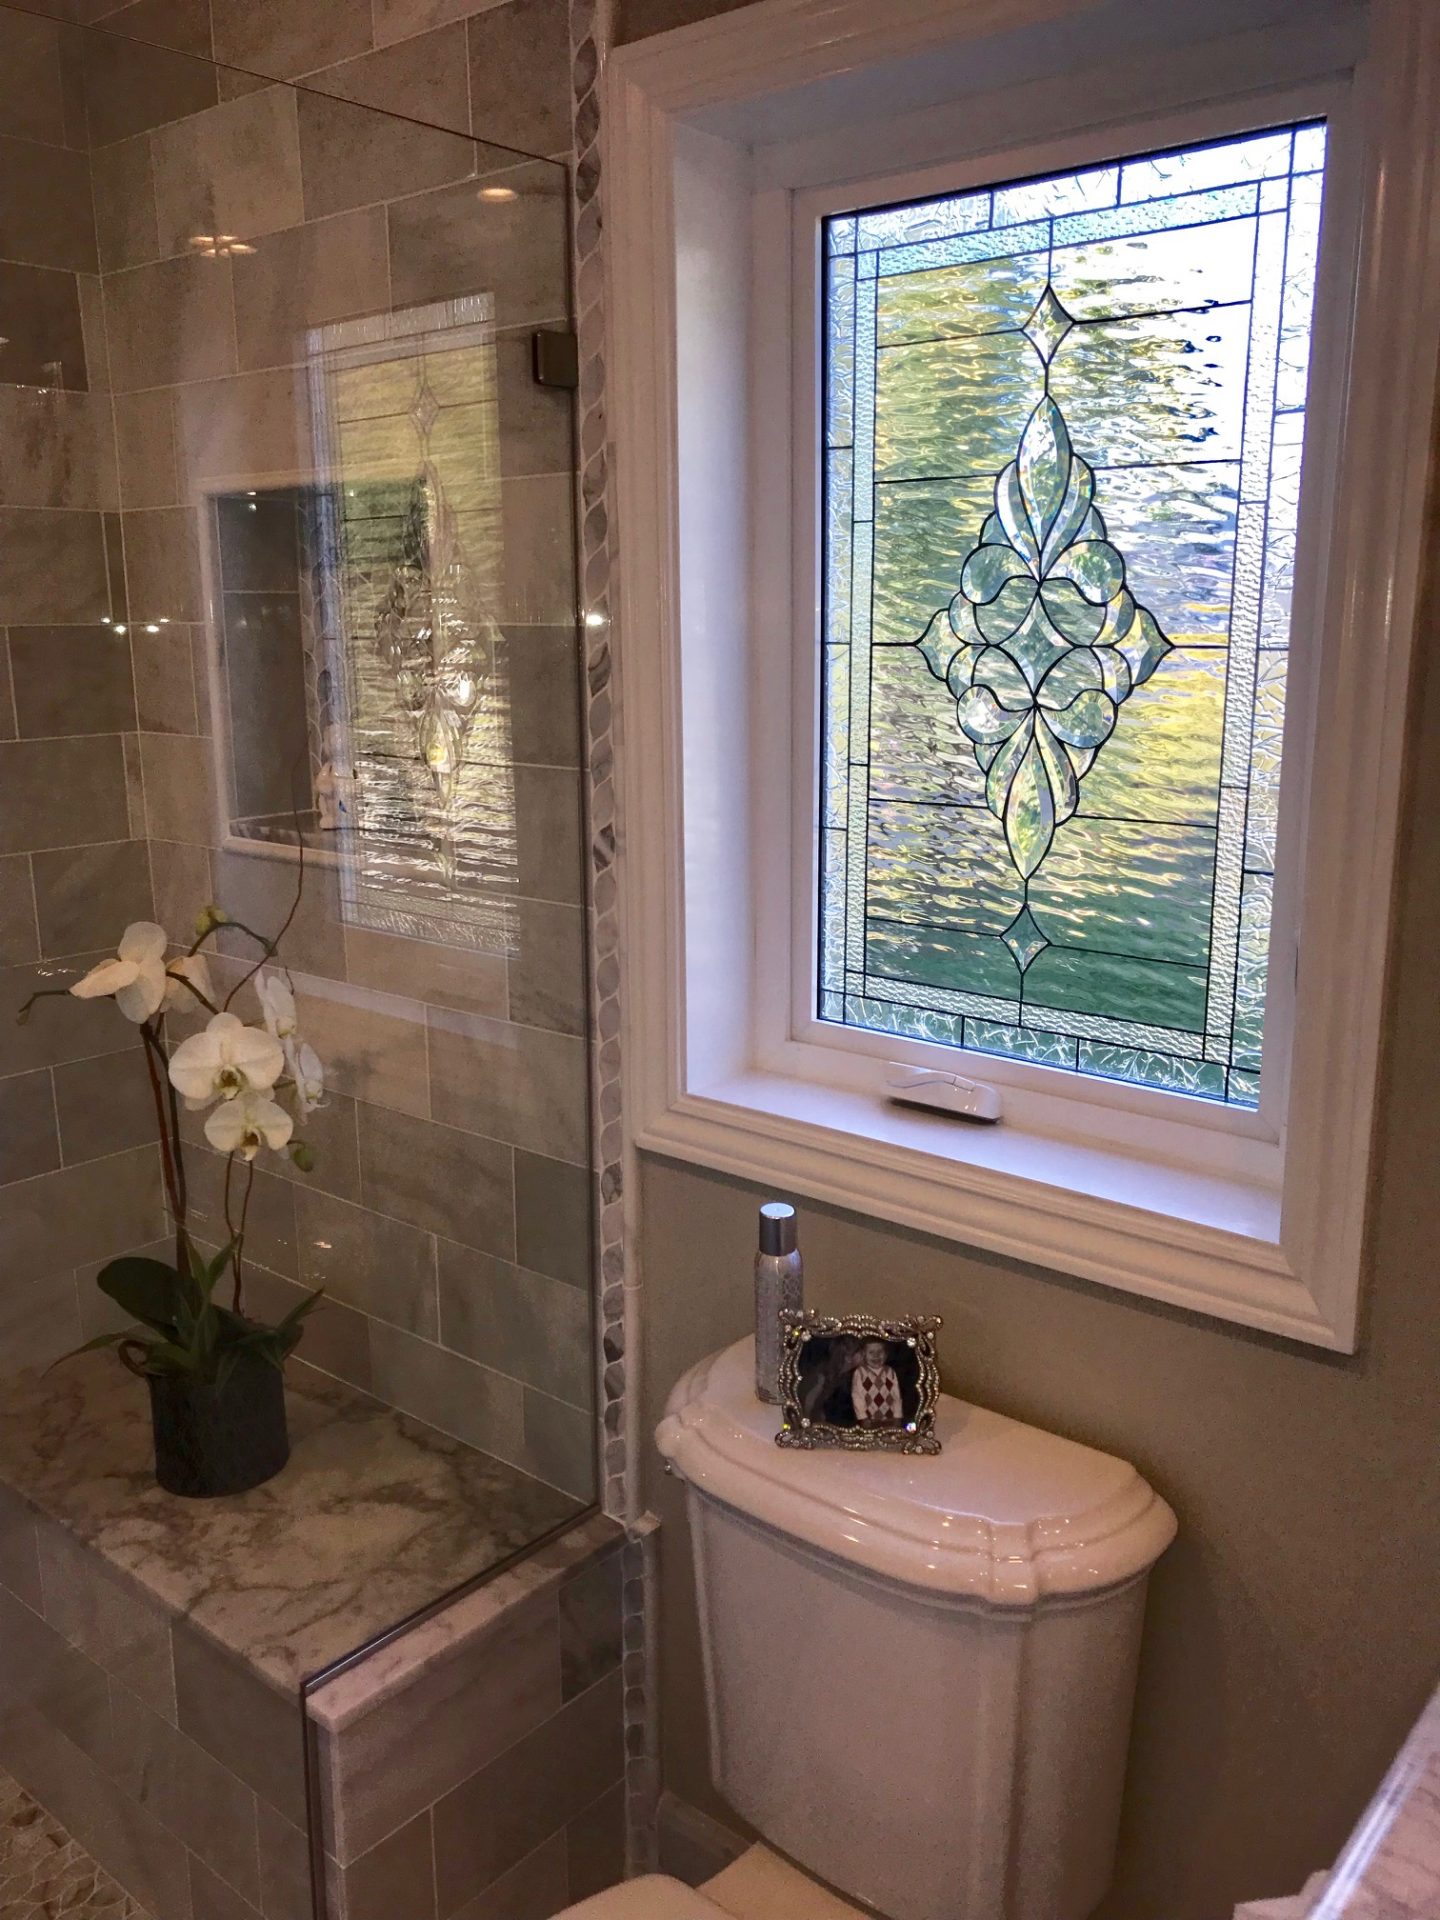 Stunning all clear beveled window installed in bathroom for privacy, light and beauty